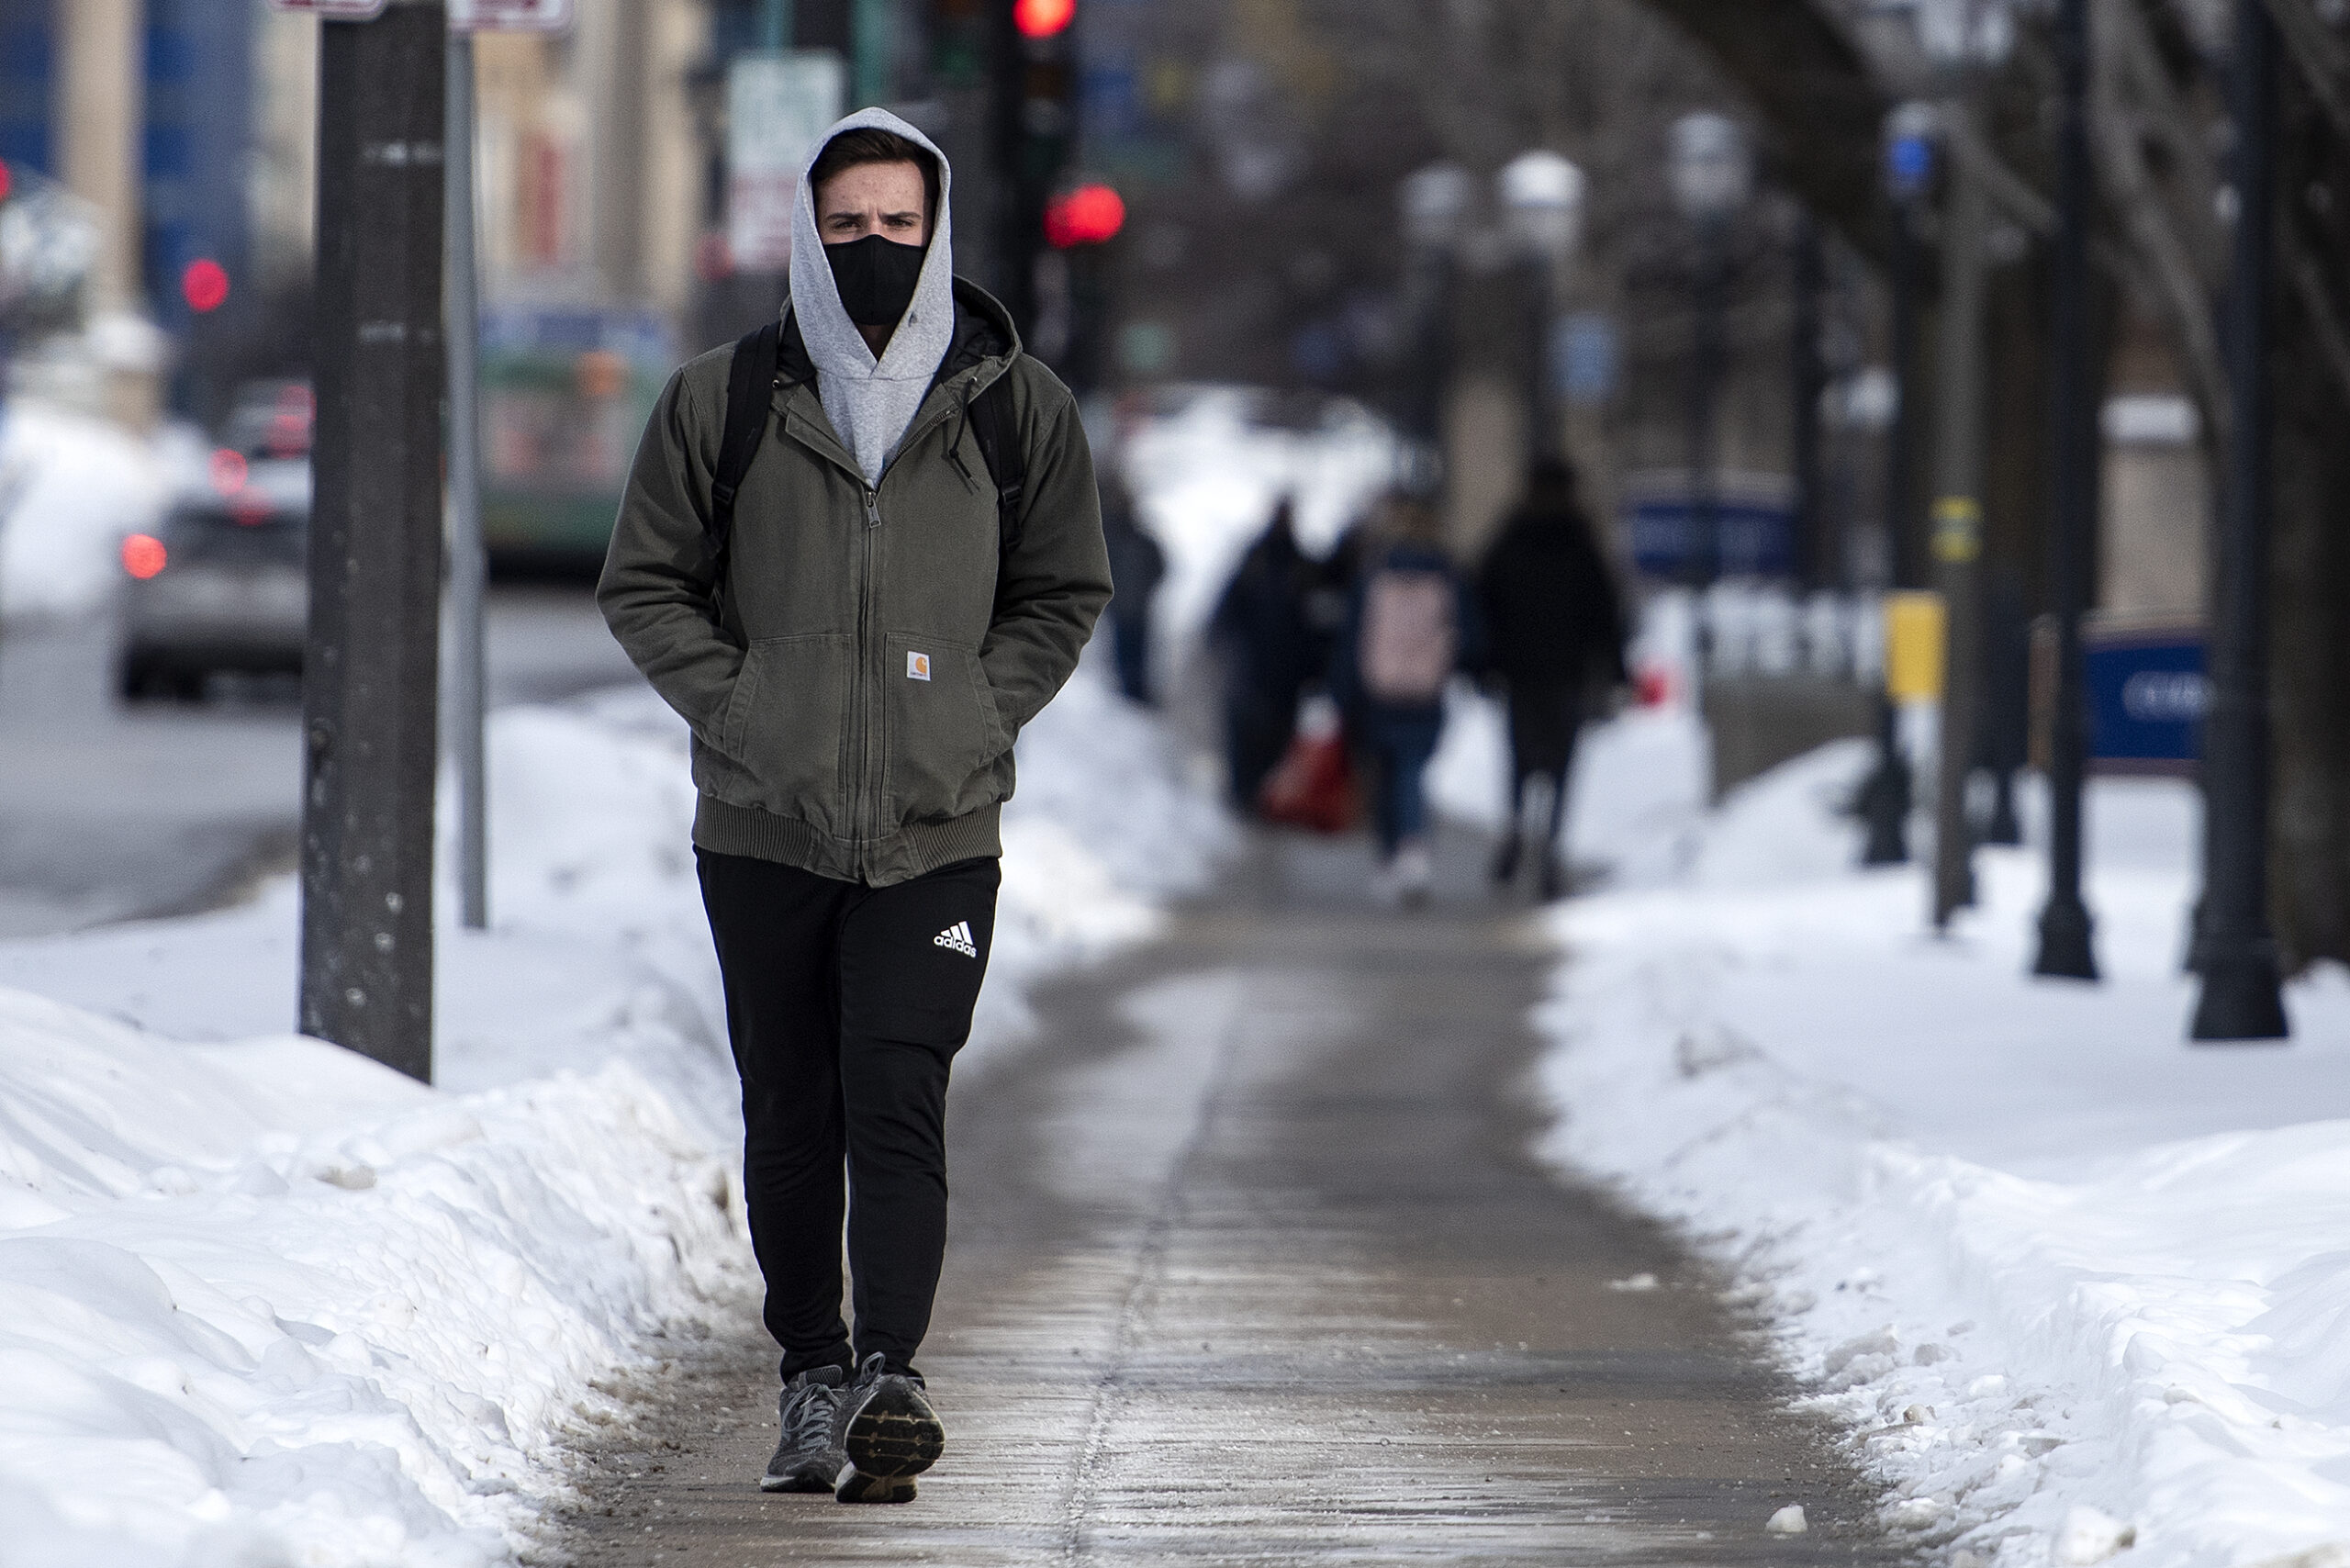 A man in winter clothing walks on a sidewalk flanked by snow.